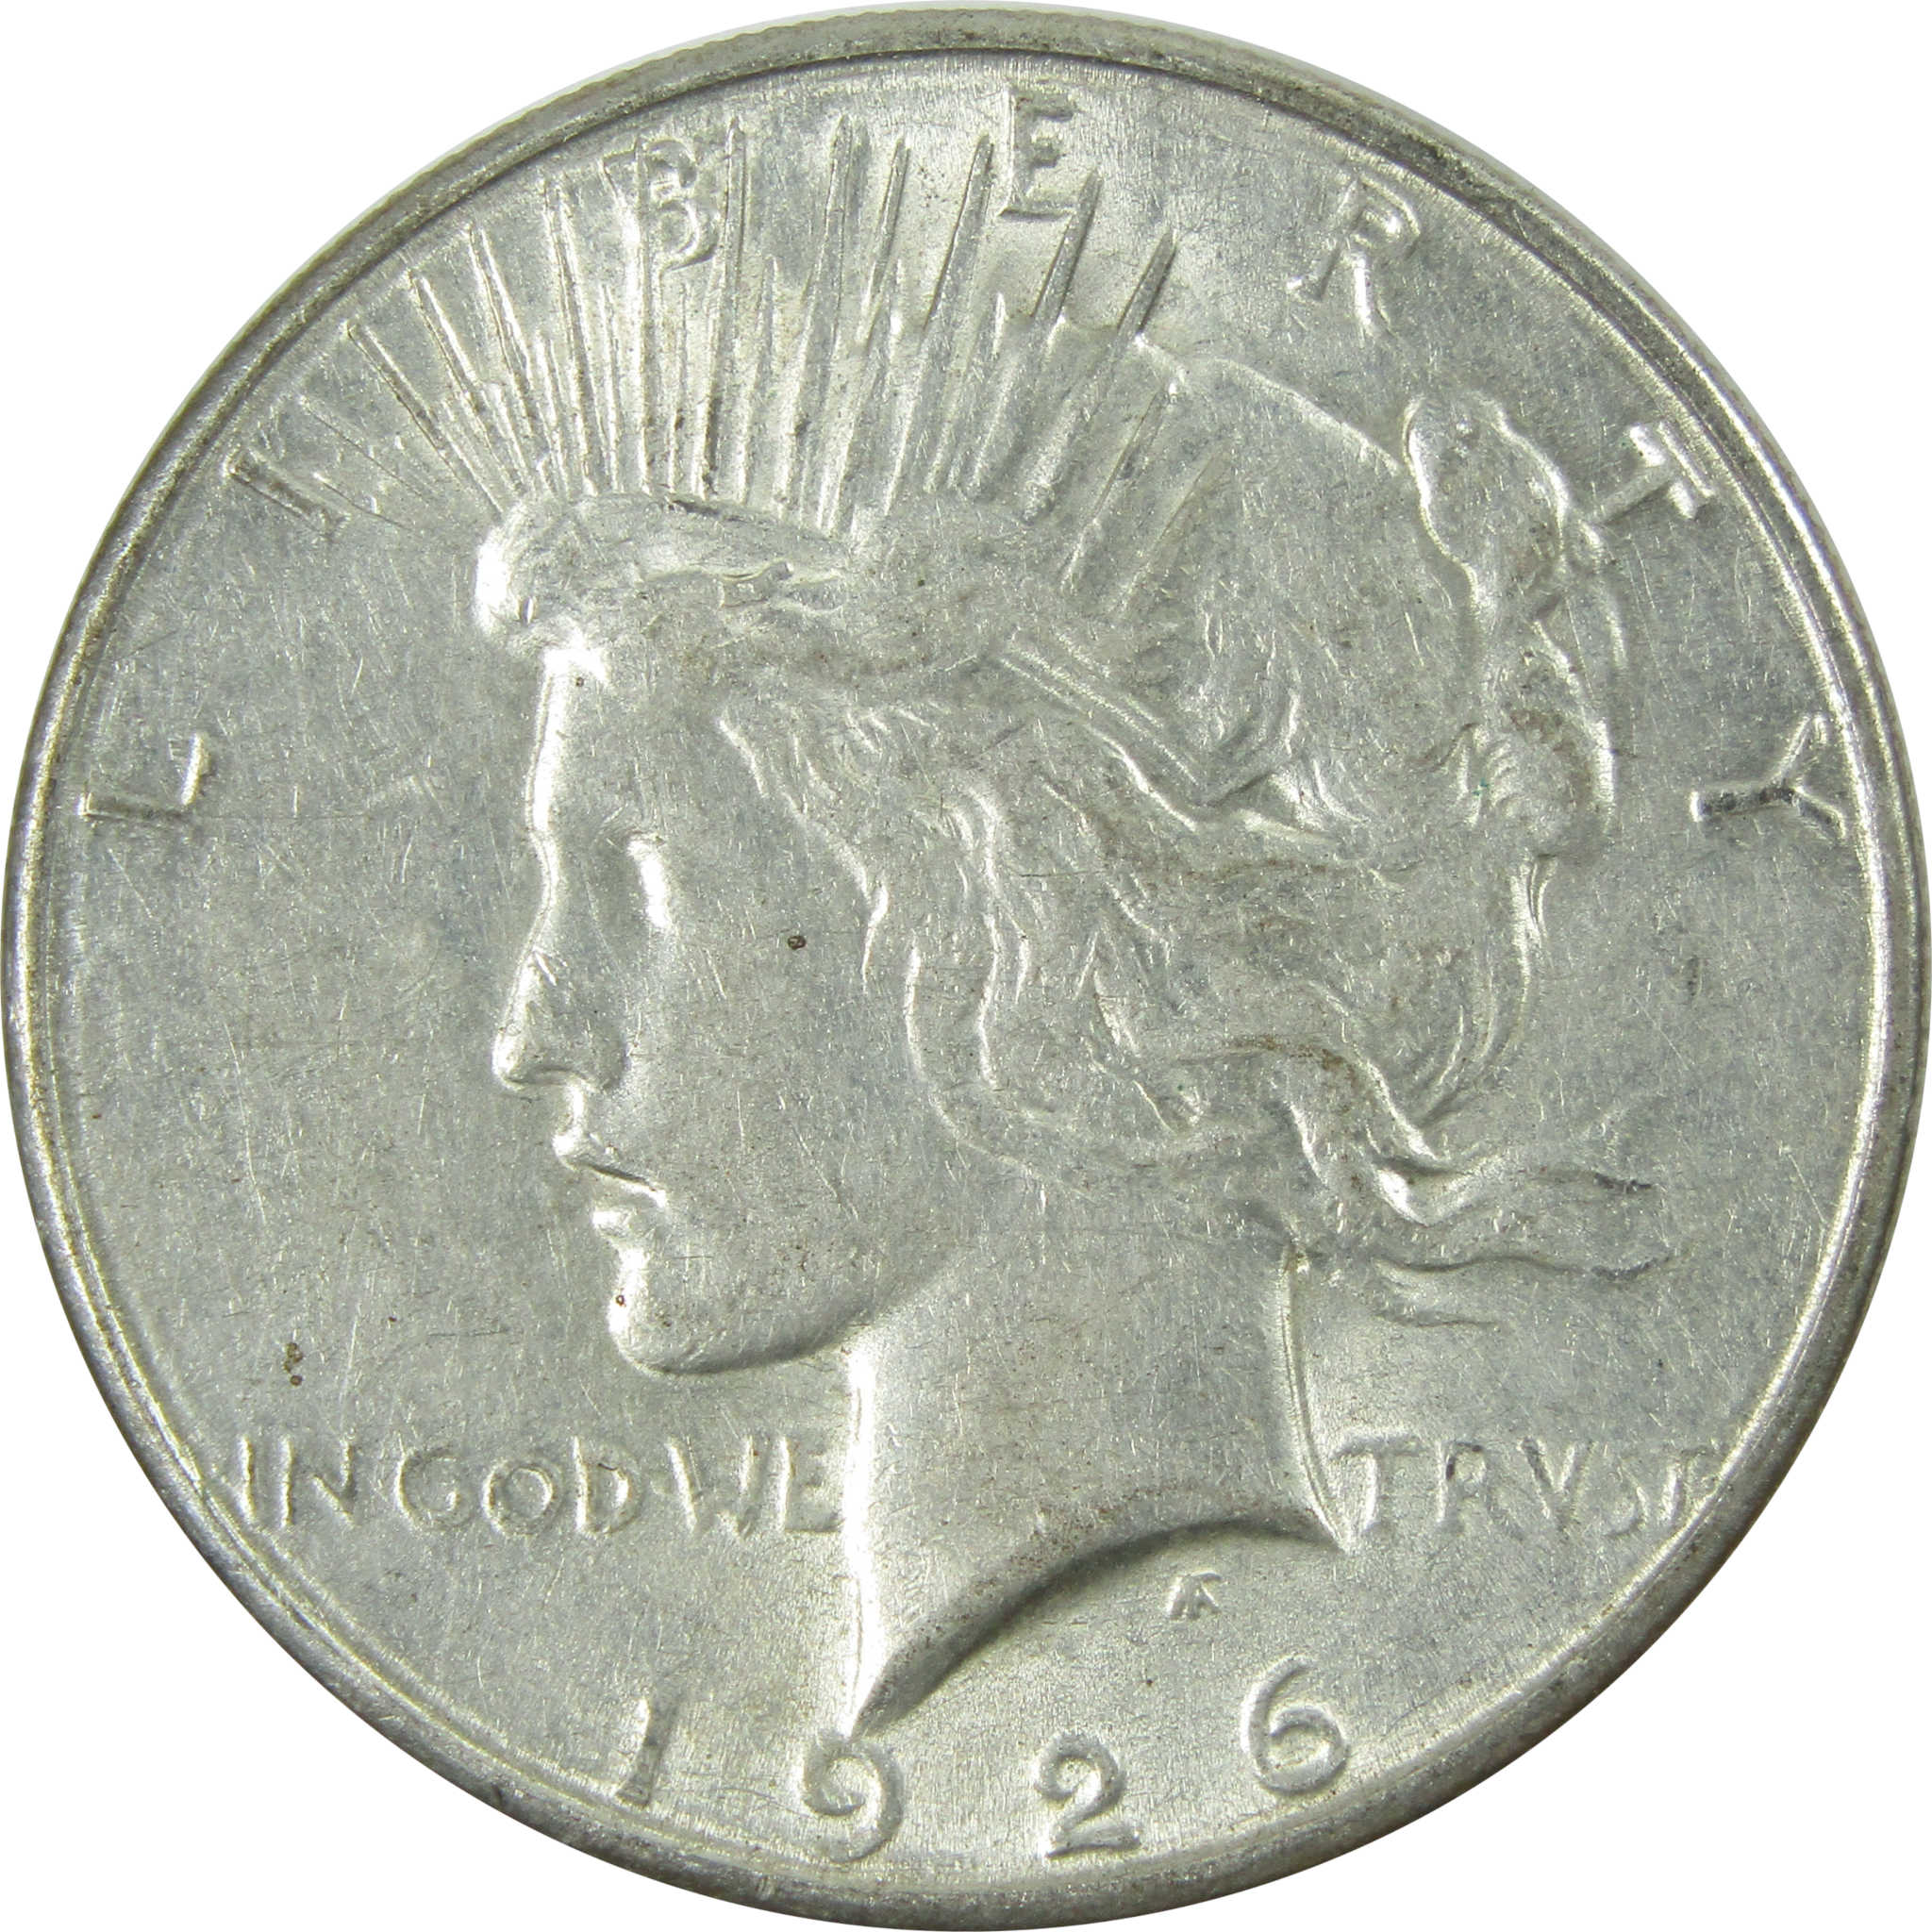 1926 S Peace Dollar AU About Uncirculated Silver $1 Coin SKU:I13694